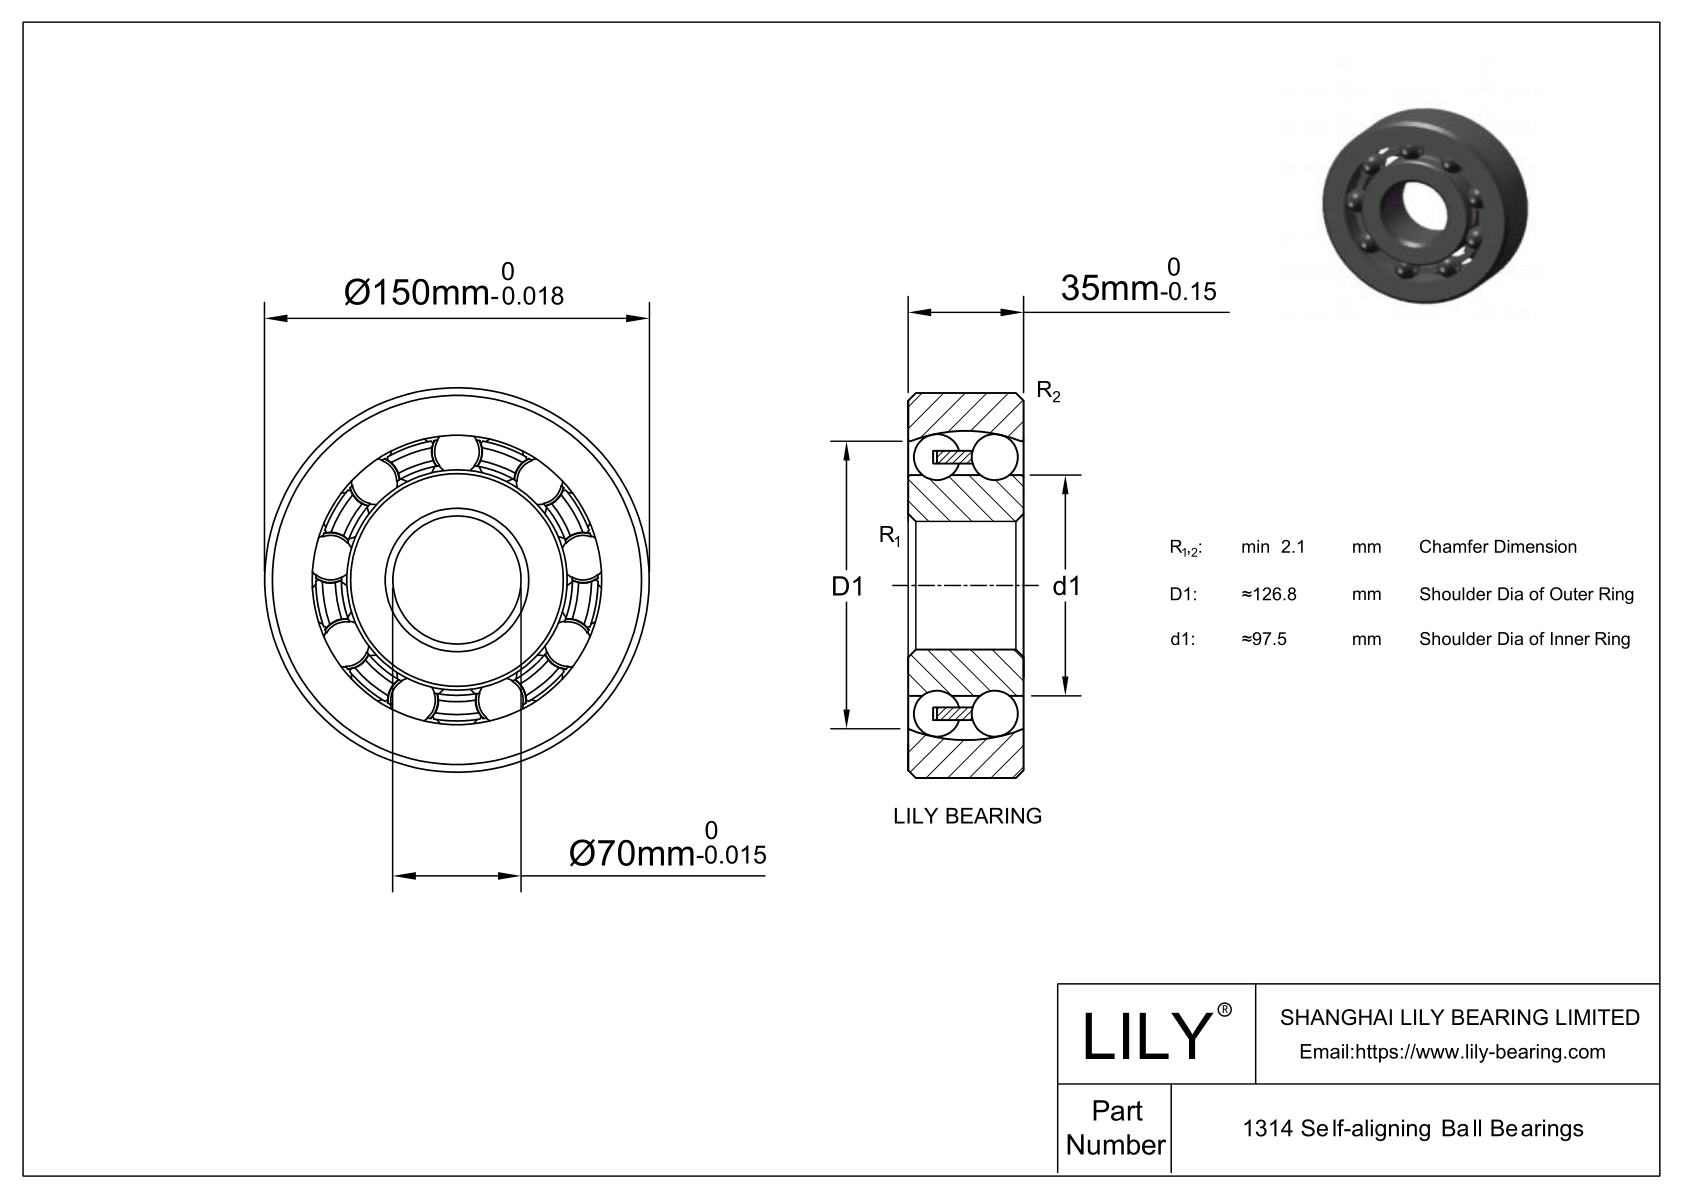 S1314 Stainless Steel Self Aligning Ball Bearings cad drawing